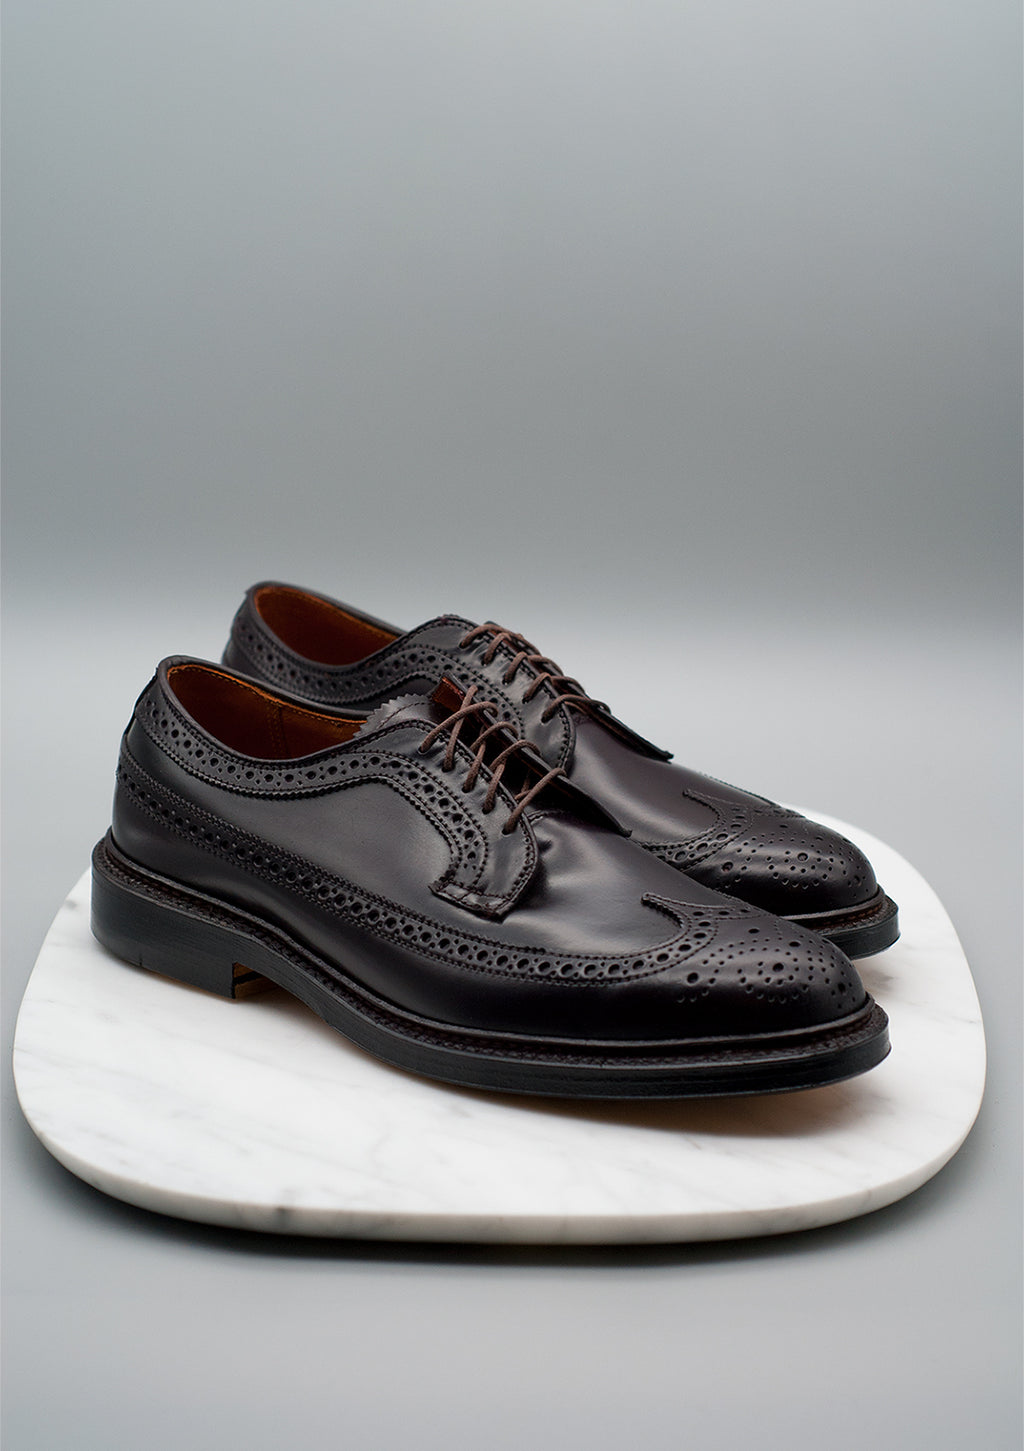 975 Long Wing Blucher - Color 8 Shell Cordovan